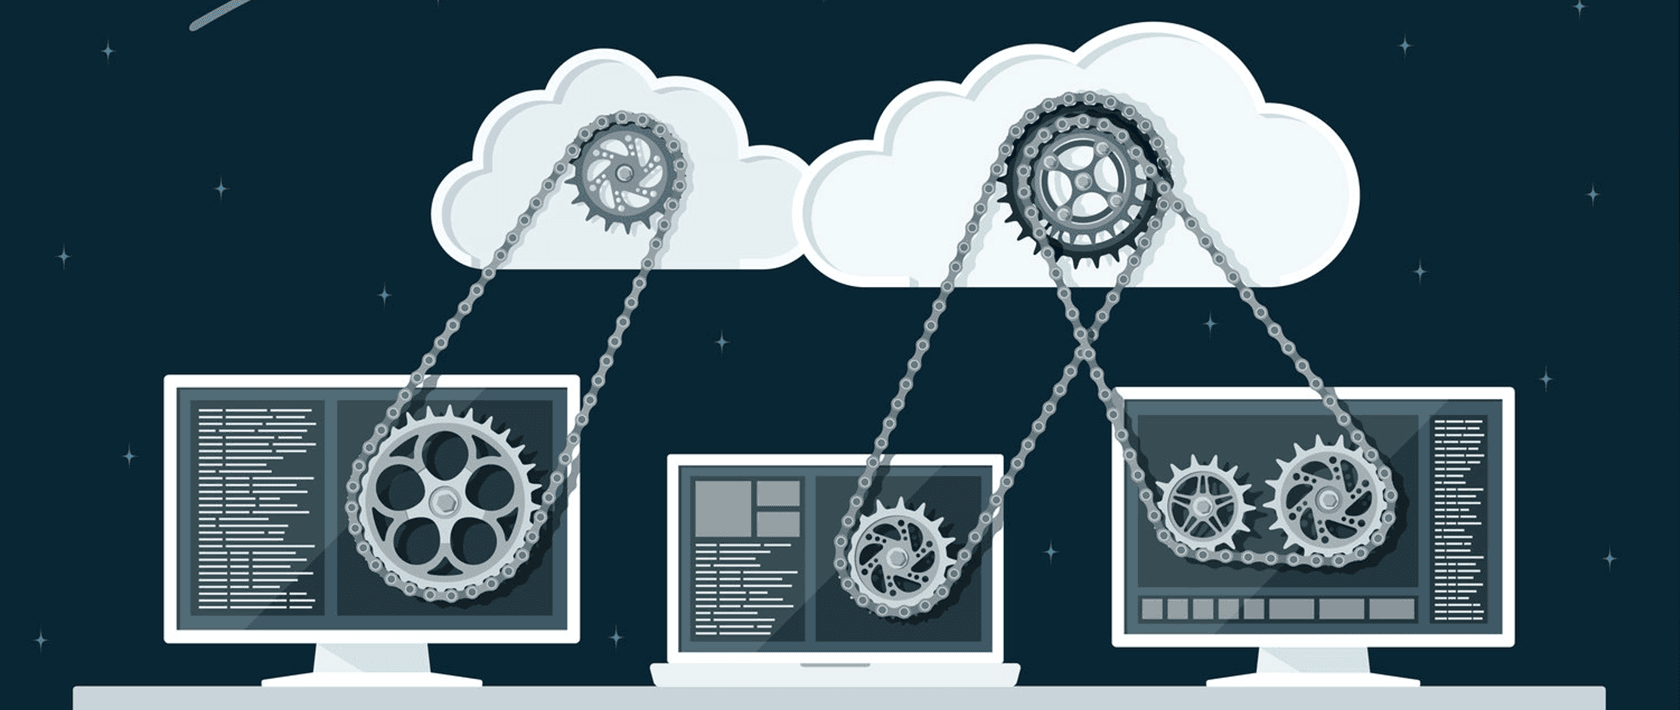 How Automating the Cloud Economy Empowers Your Enterprise Through Flexibility